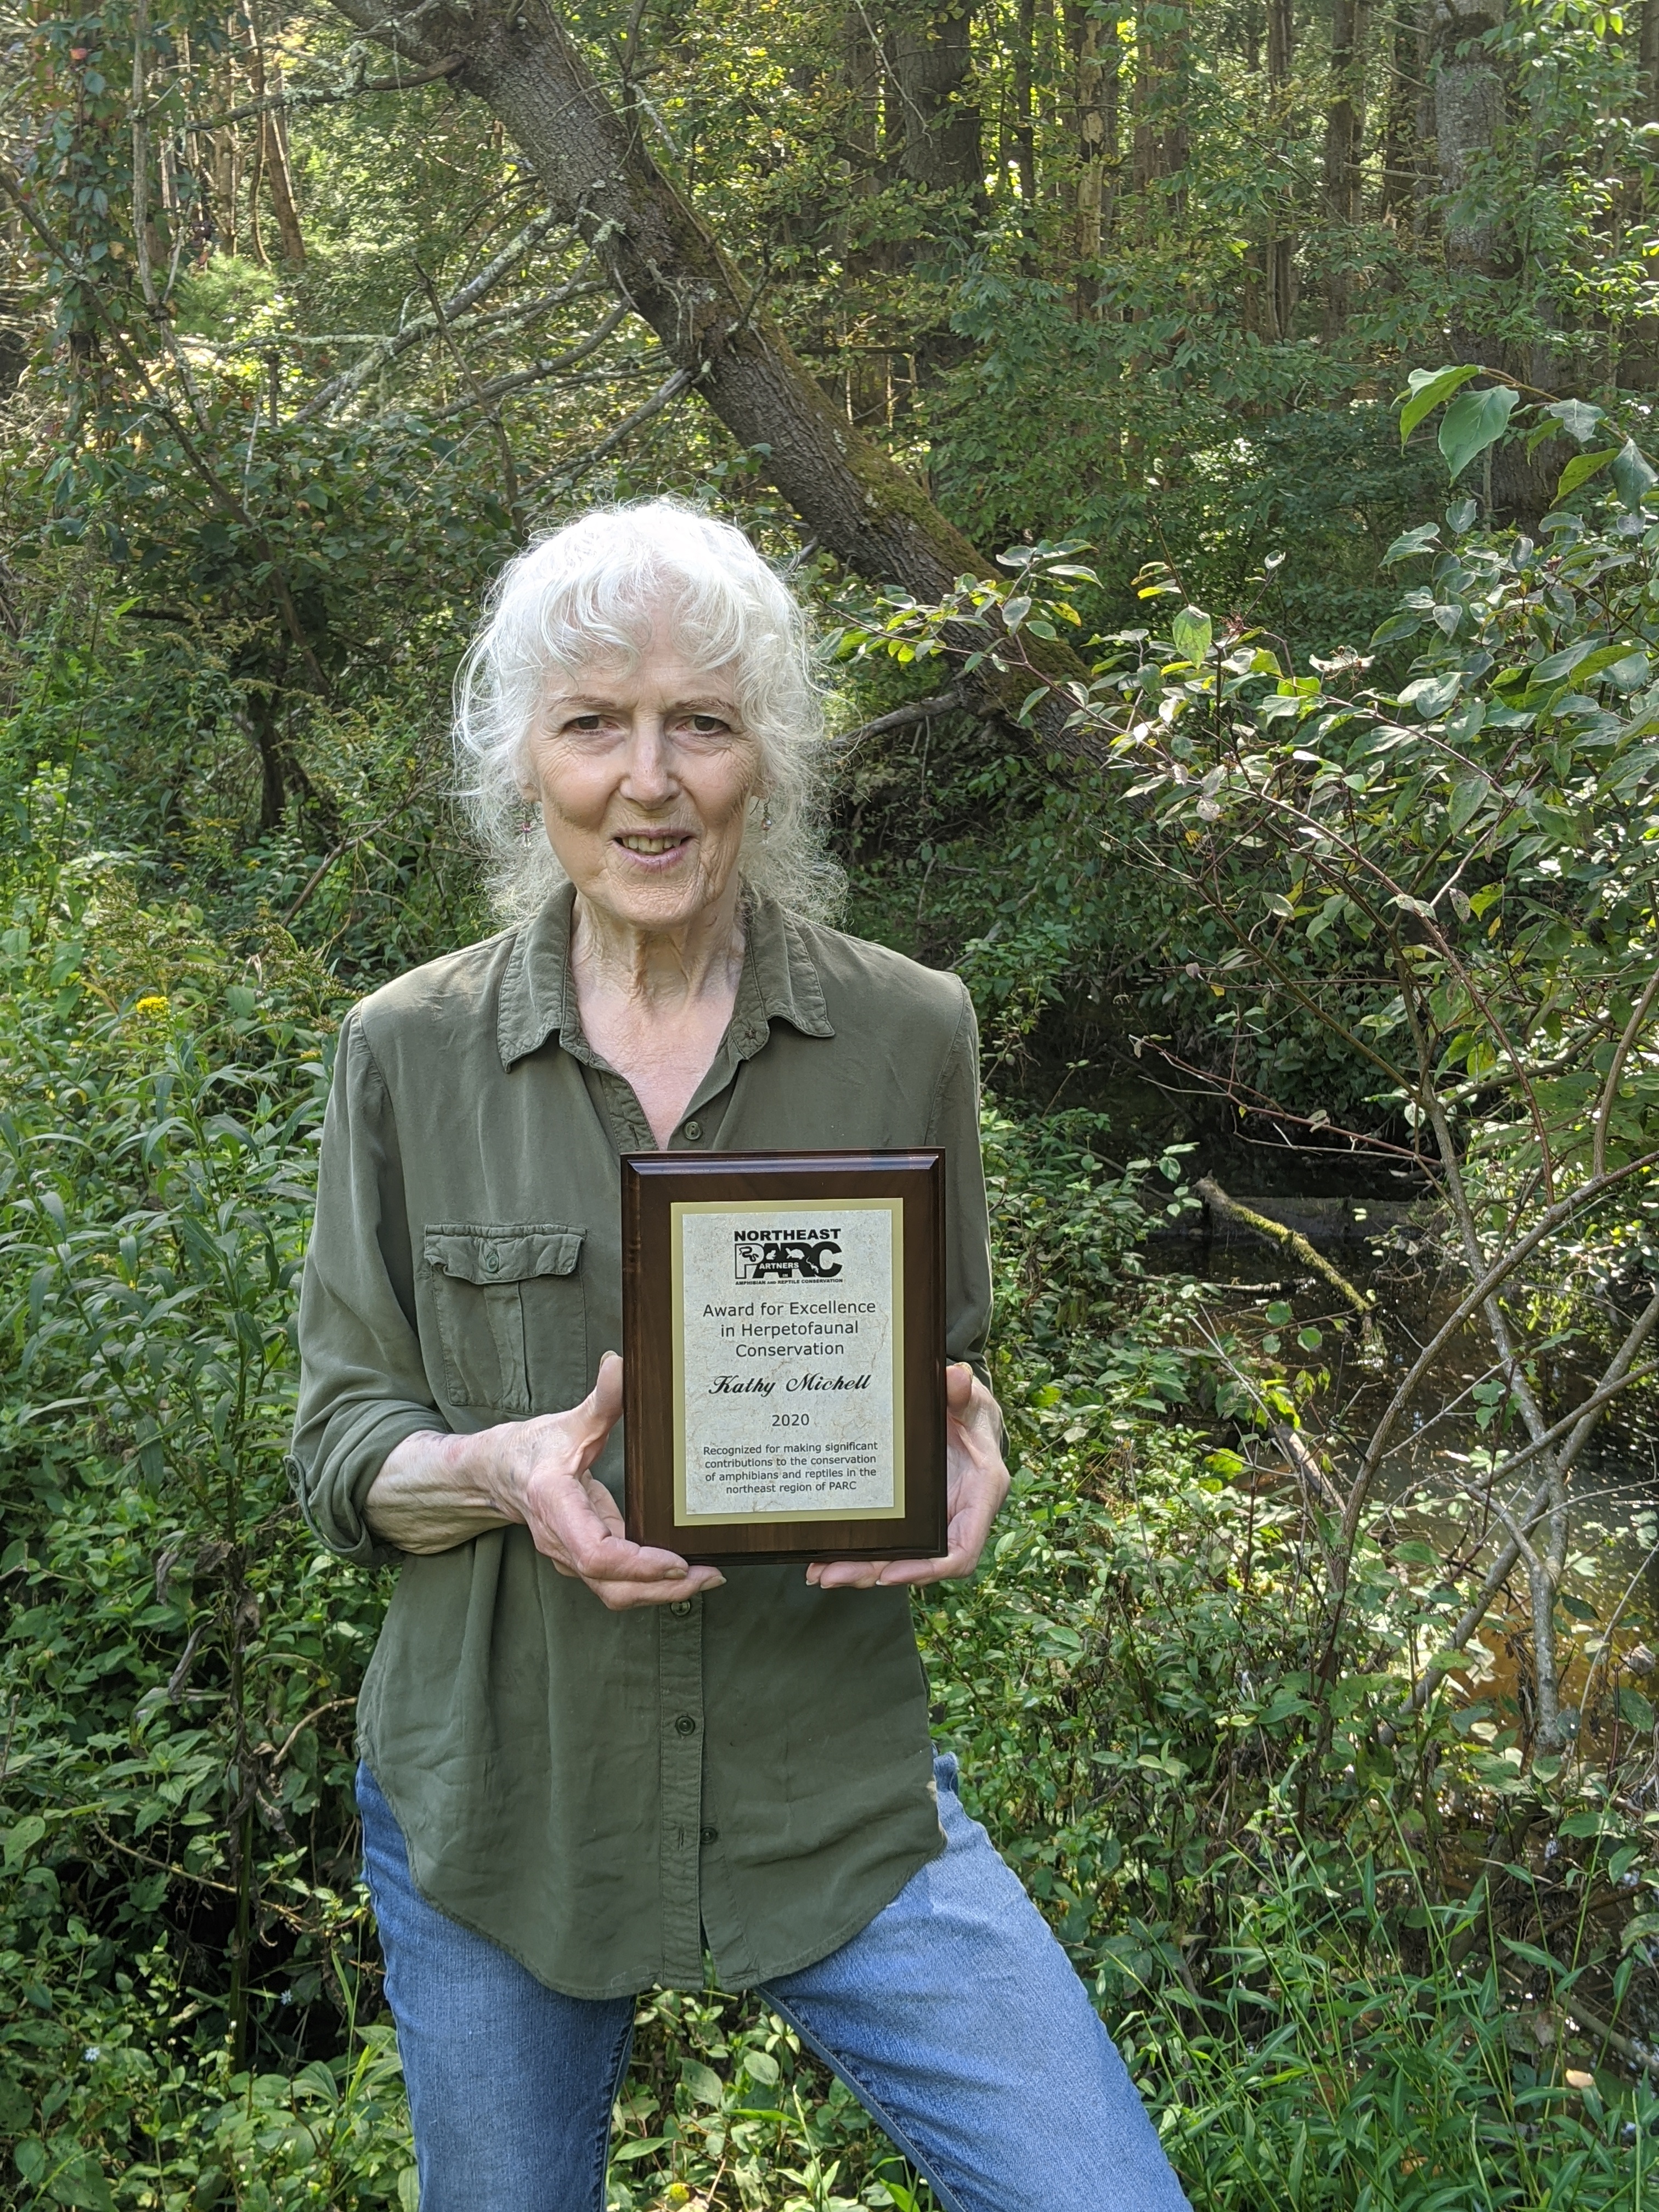 Kathy Michell with award at wood turtle stream 1.jpg